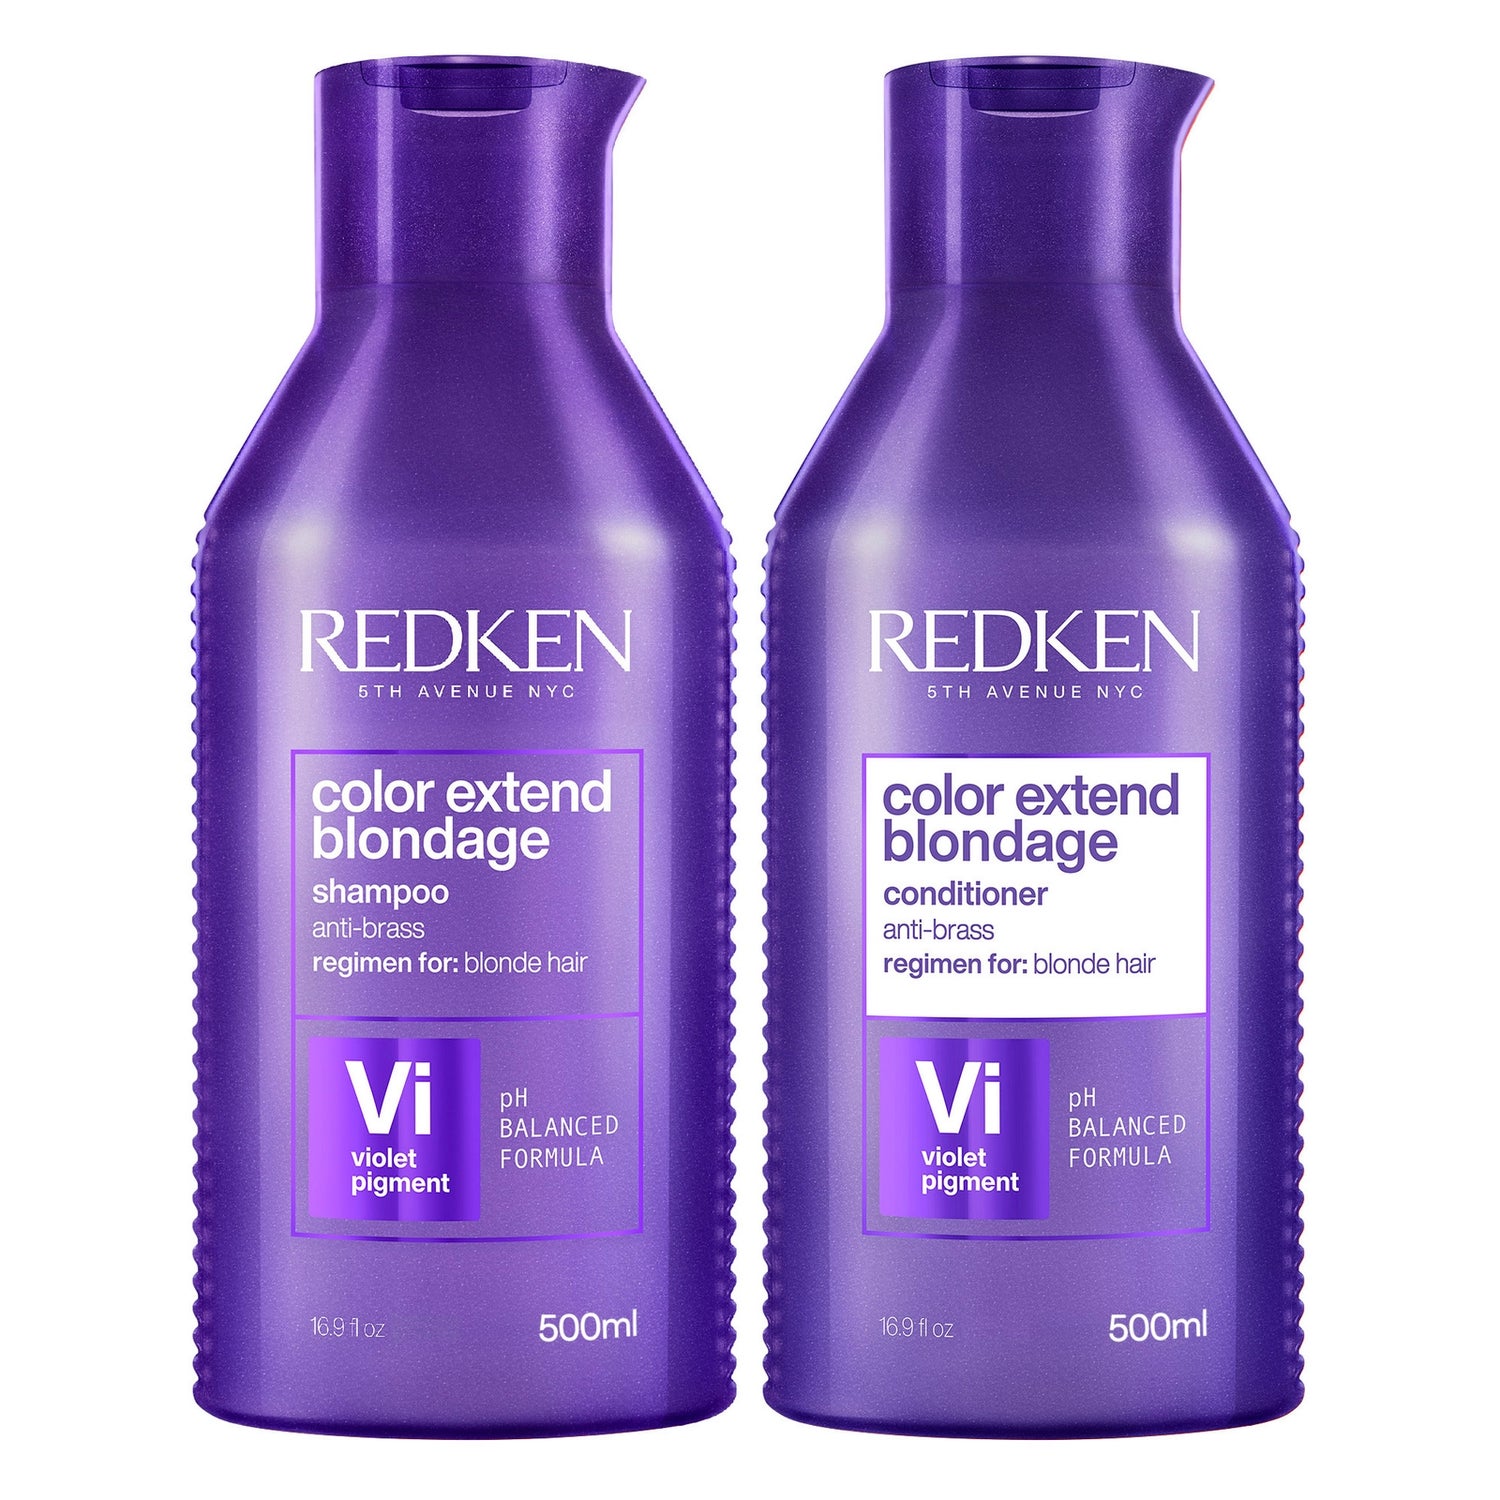 Redken Color Extend Blondage Shampoo and Conditioner Routine for Blonde Hair 500ml (Worth $116.00)